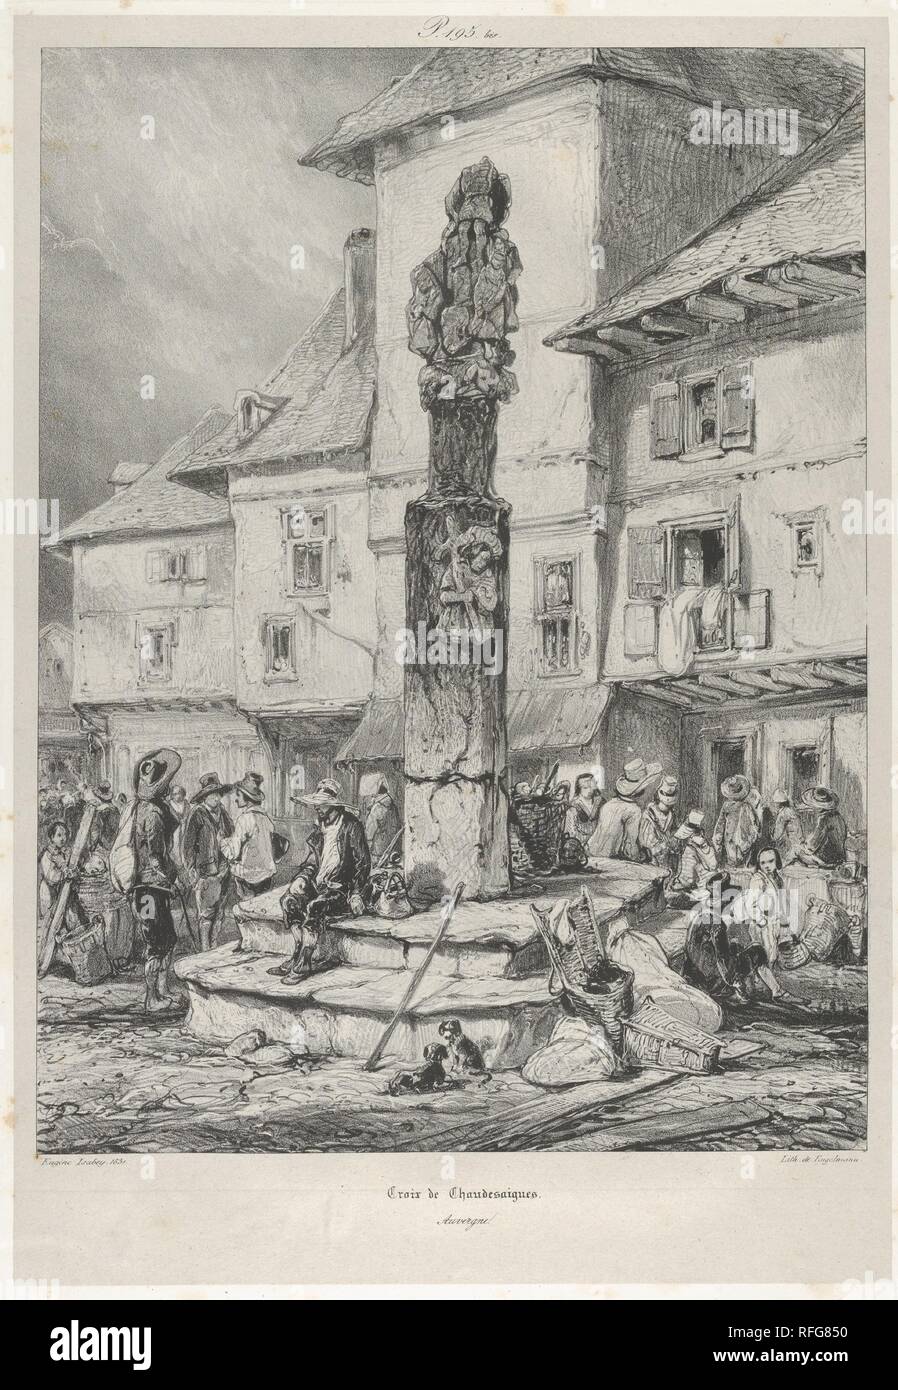 Cross of Chaudesaigues. Artist: Eugène Isabey (French, Paris 1803-1886 Lagny). Dimensions: Sheet: 20 7/8 × 13 7/8 in. (53 × 35.3 cm)  Image: 14 3/8 × 9 15/16 in. (36.5 × 25.2 cm). Printer: Godefroy Engelmann (German (born France), Mulhouse 1788-1839 Mulhouse). Series/Portfolio: Voyages Pittoresques et Romantiques dans L'Ancienne France. Date: 1831.  This is from the series of prints Eugène Isabey made for the 'Auvergne' chapter of  the book 'Voyages pittoresques et romantiques dans l'ancienne France'. Museum: Metropolitan Museum of Art, New York, USA. Stock Photo